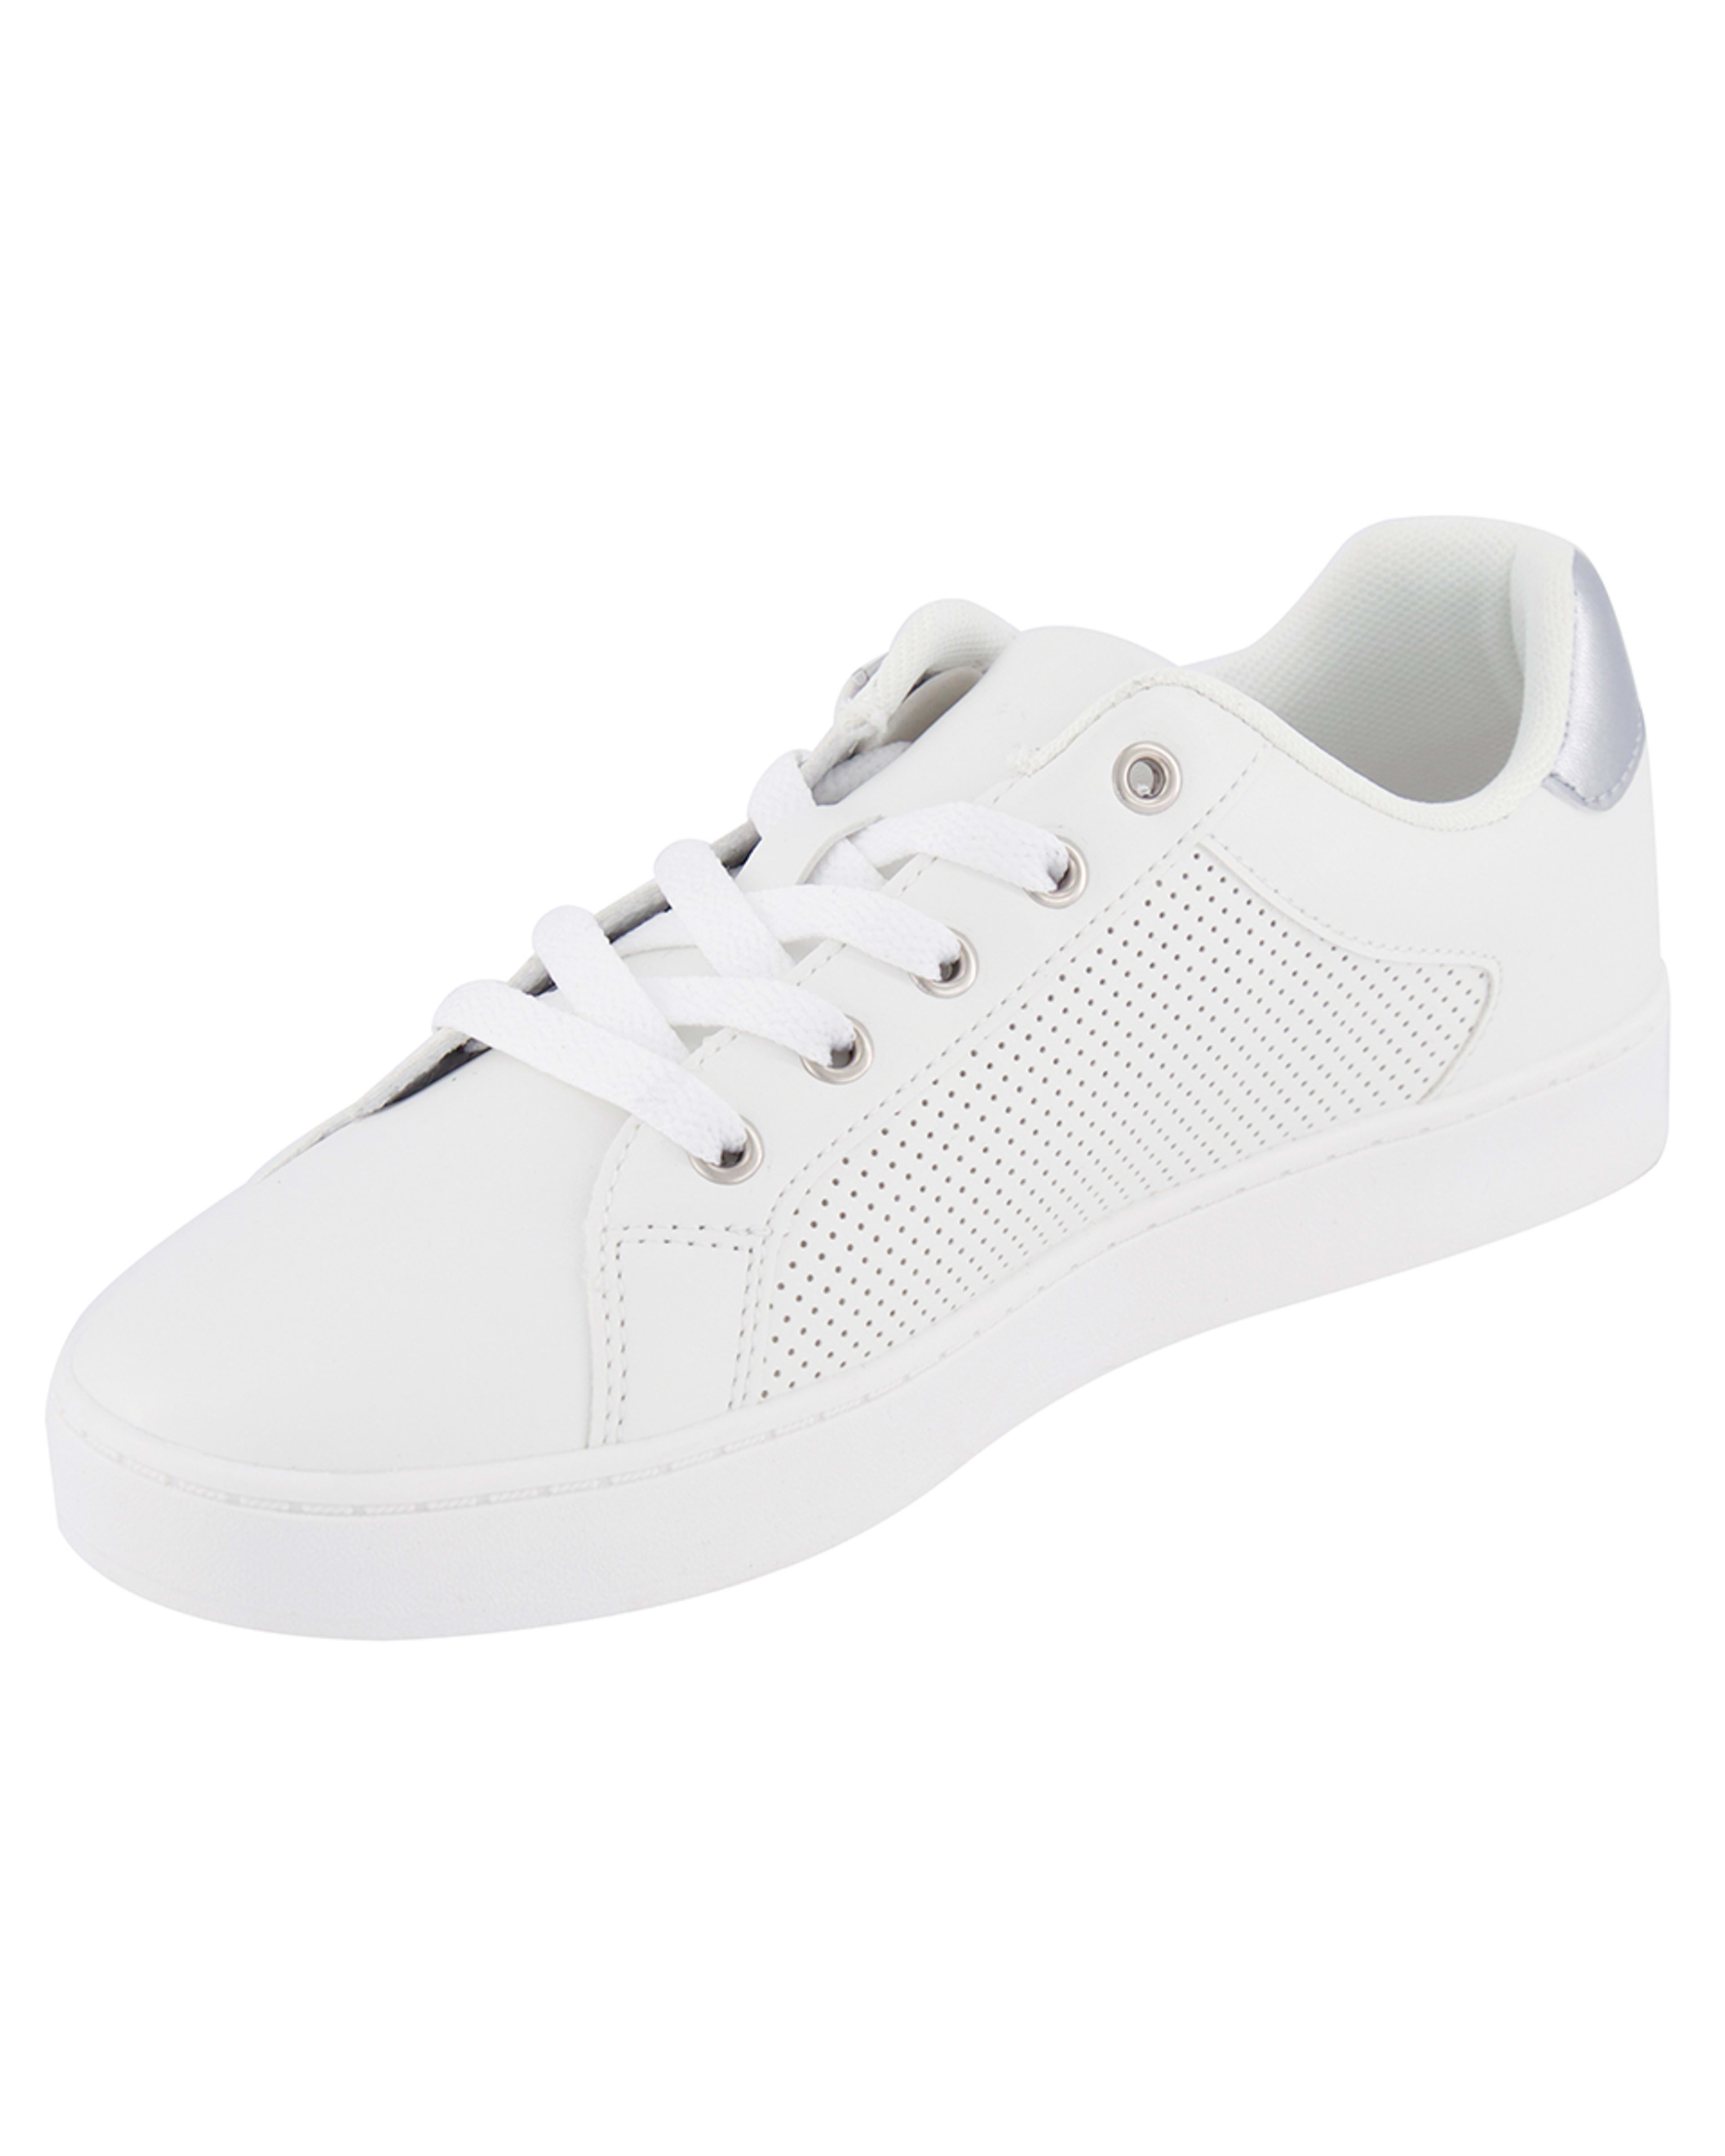 Lace-up Perforated Sneakers - Kmart NZ